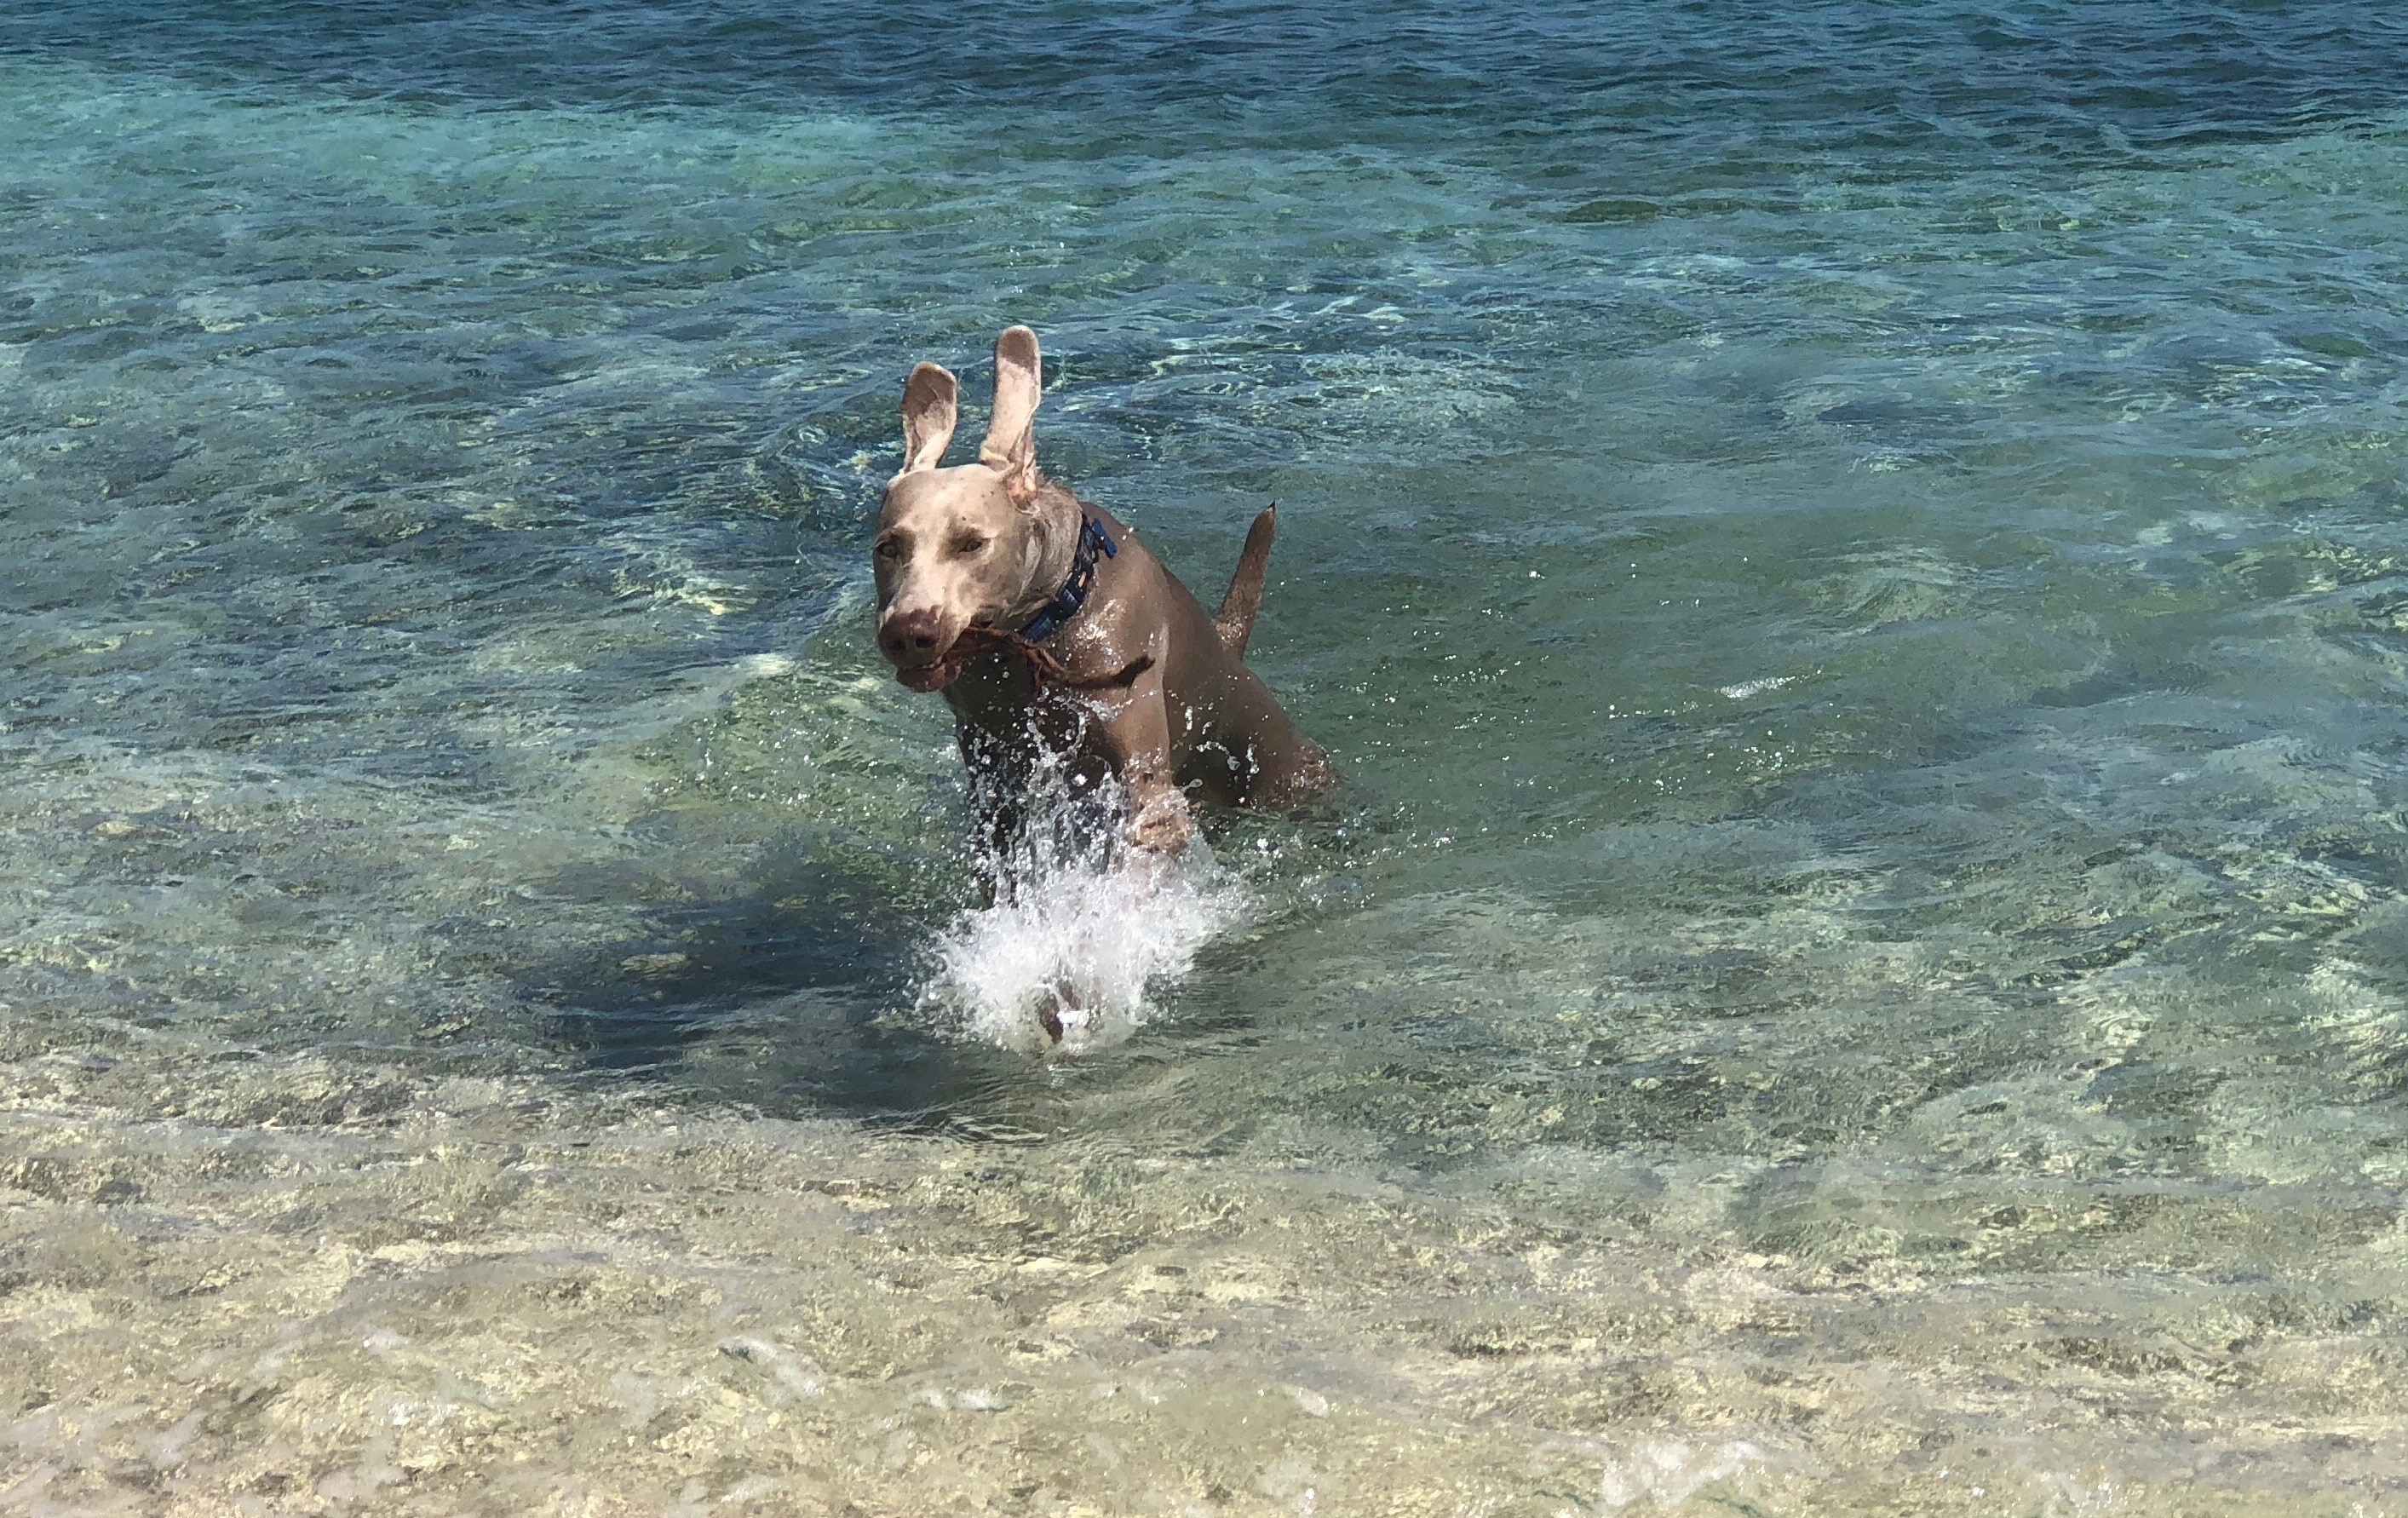 Four wheel (and paw) drive only, please!

This beach is tucked away and secluded as a local's favorite.  Great sticks are to be had to make for a great game of fetch.

Weimaraner ears are ready for takeoff!

#LifeatExpedia #USVI #StThomas #beachday #Julycontest